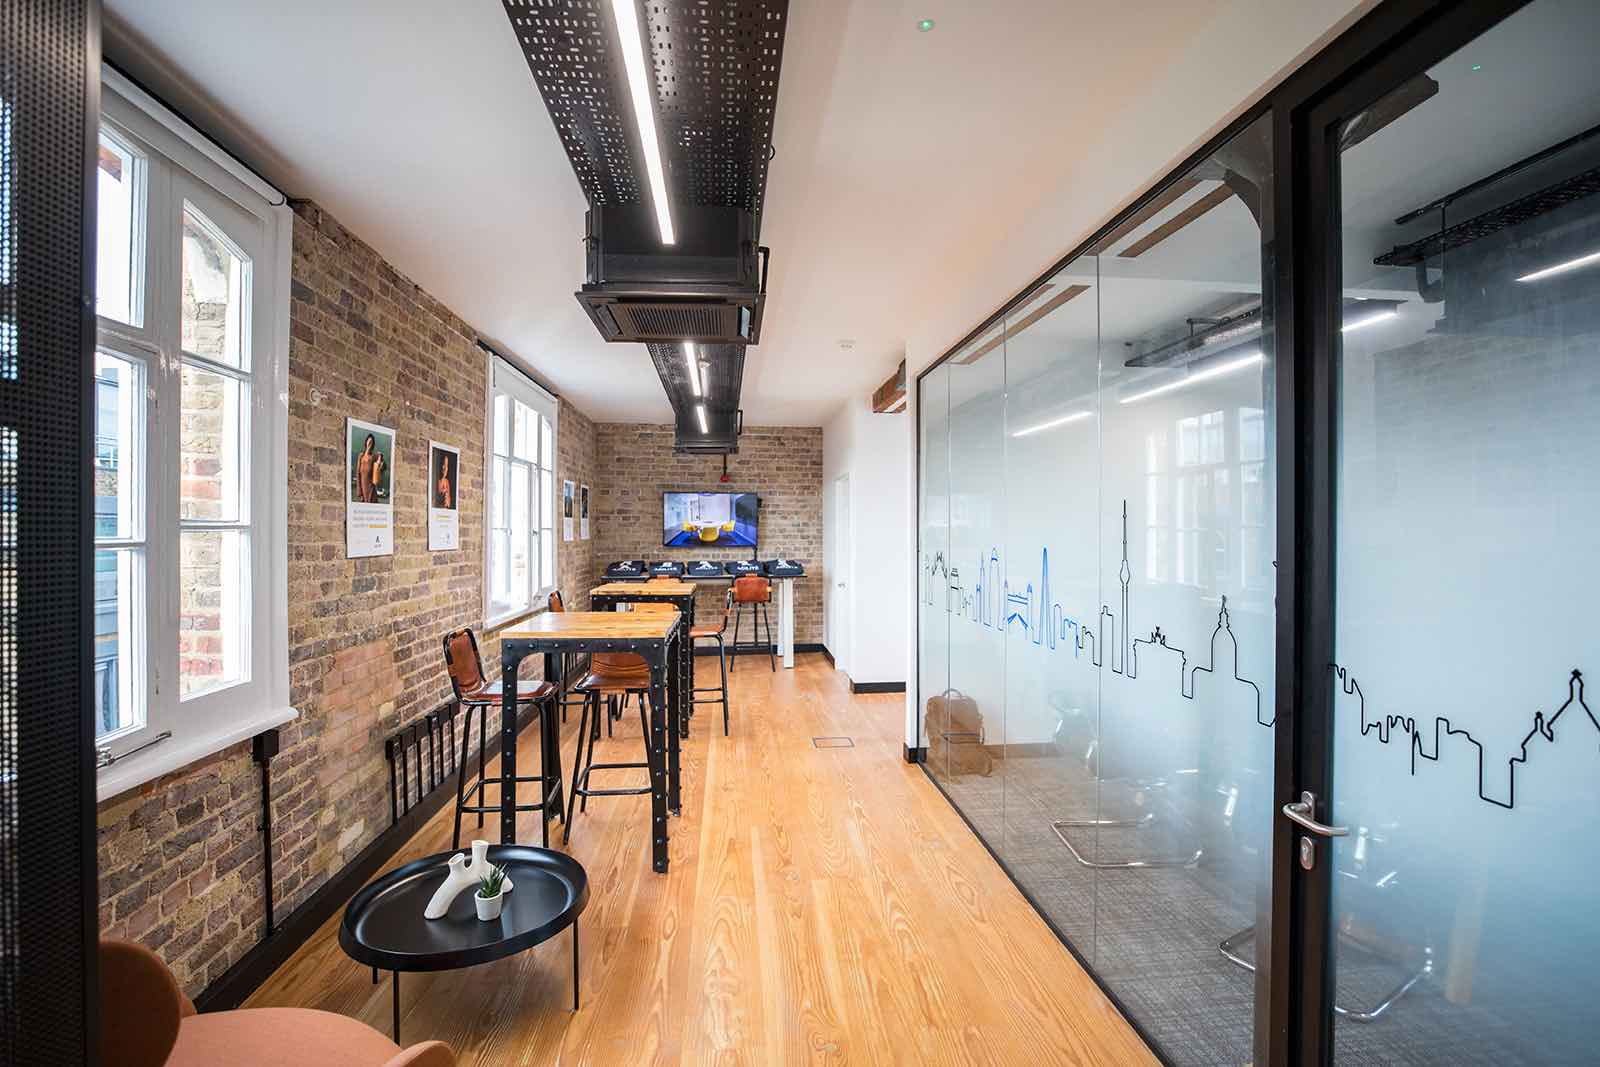 Agilite office with wooden floors, brick wall, and ceiling light in a room with desks.